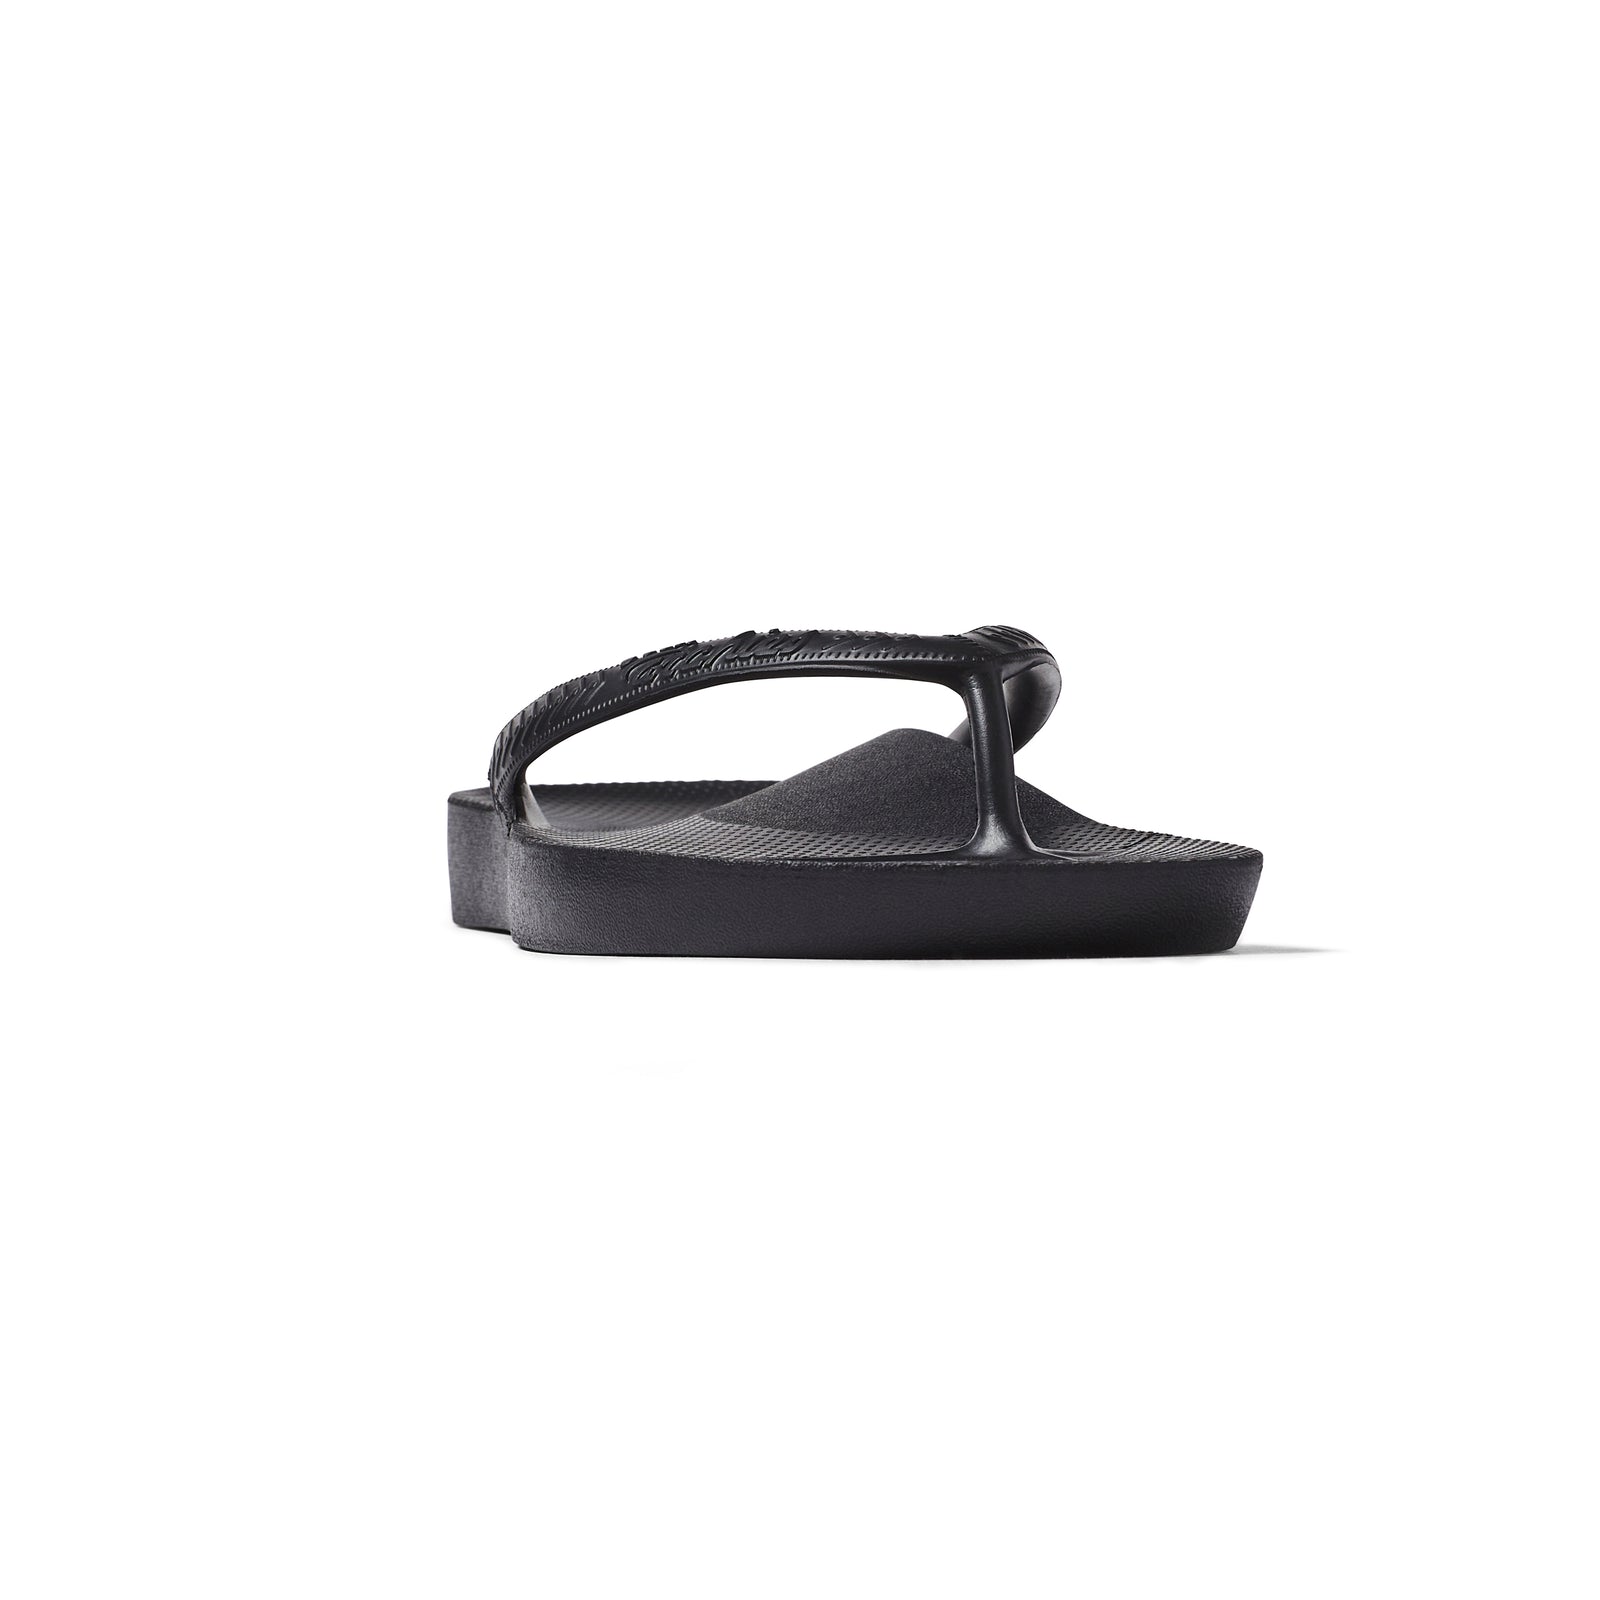 Archies Arch Support Flip Flops - Orthotic Sandals – Archies Footwear Pty  Ltd.